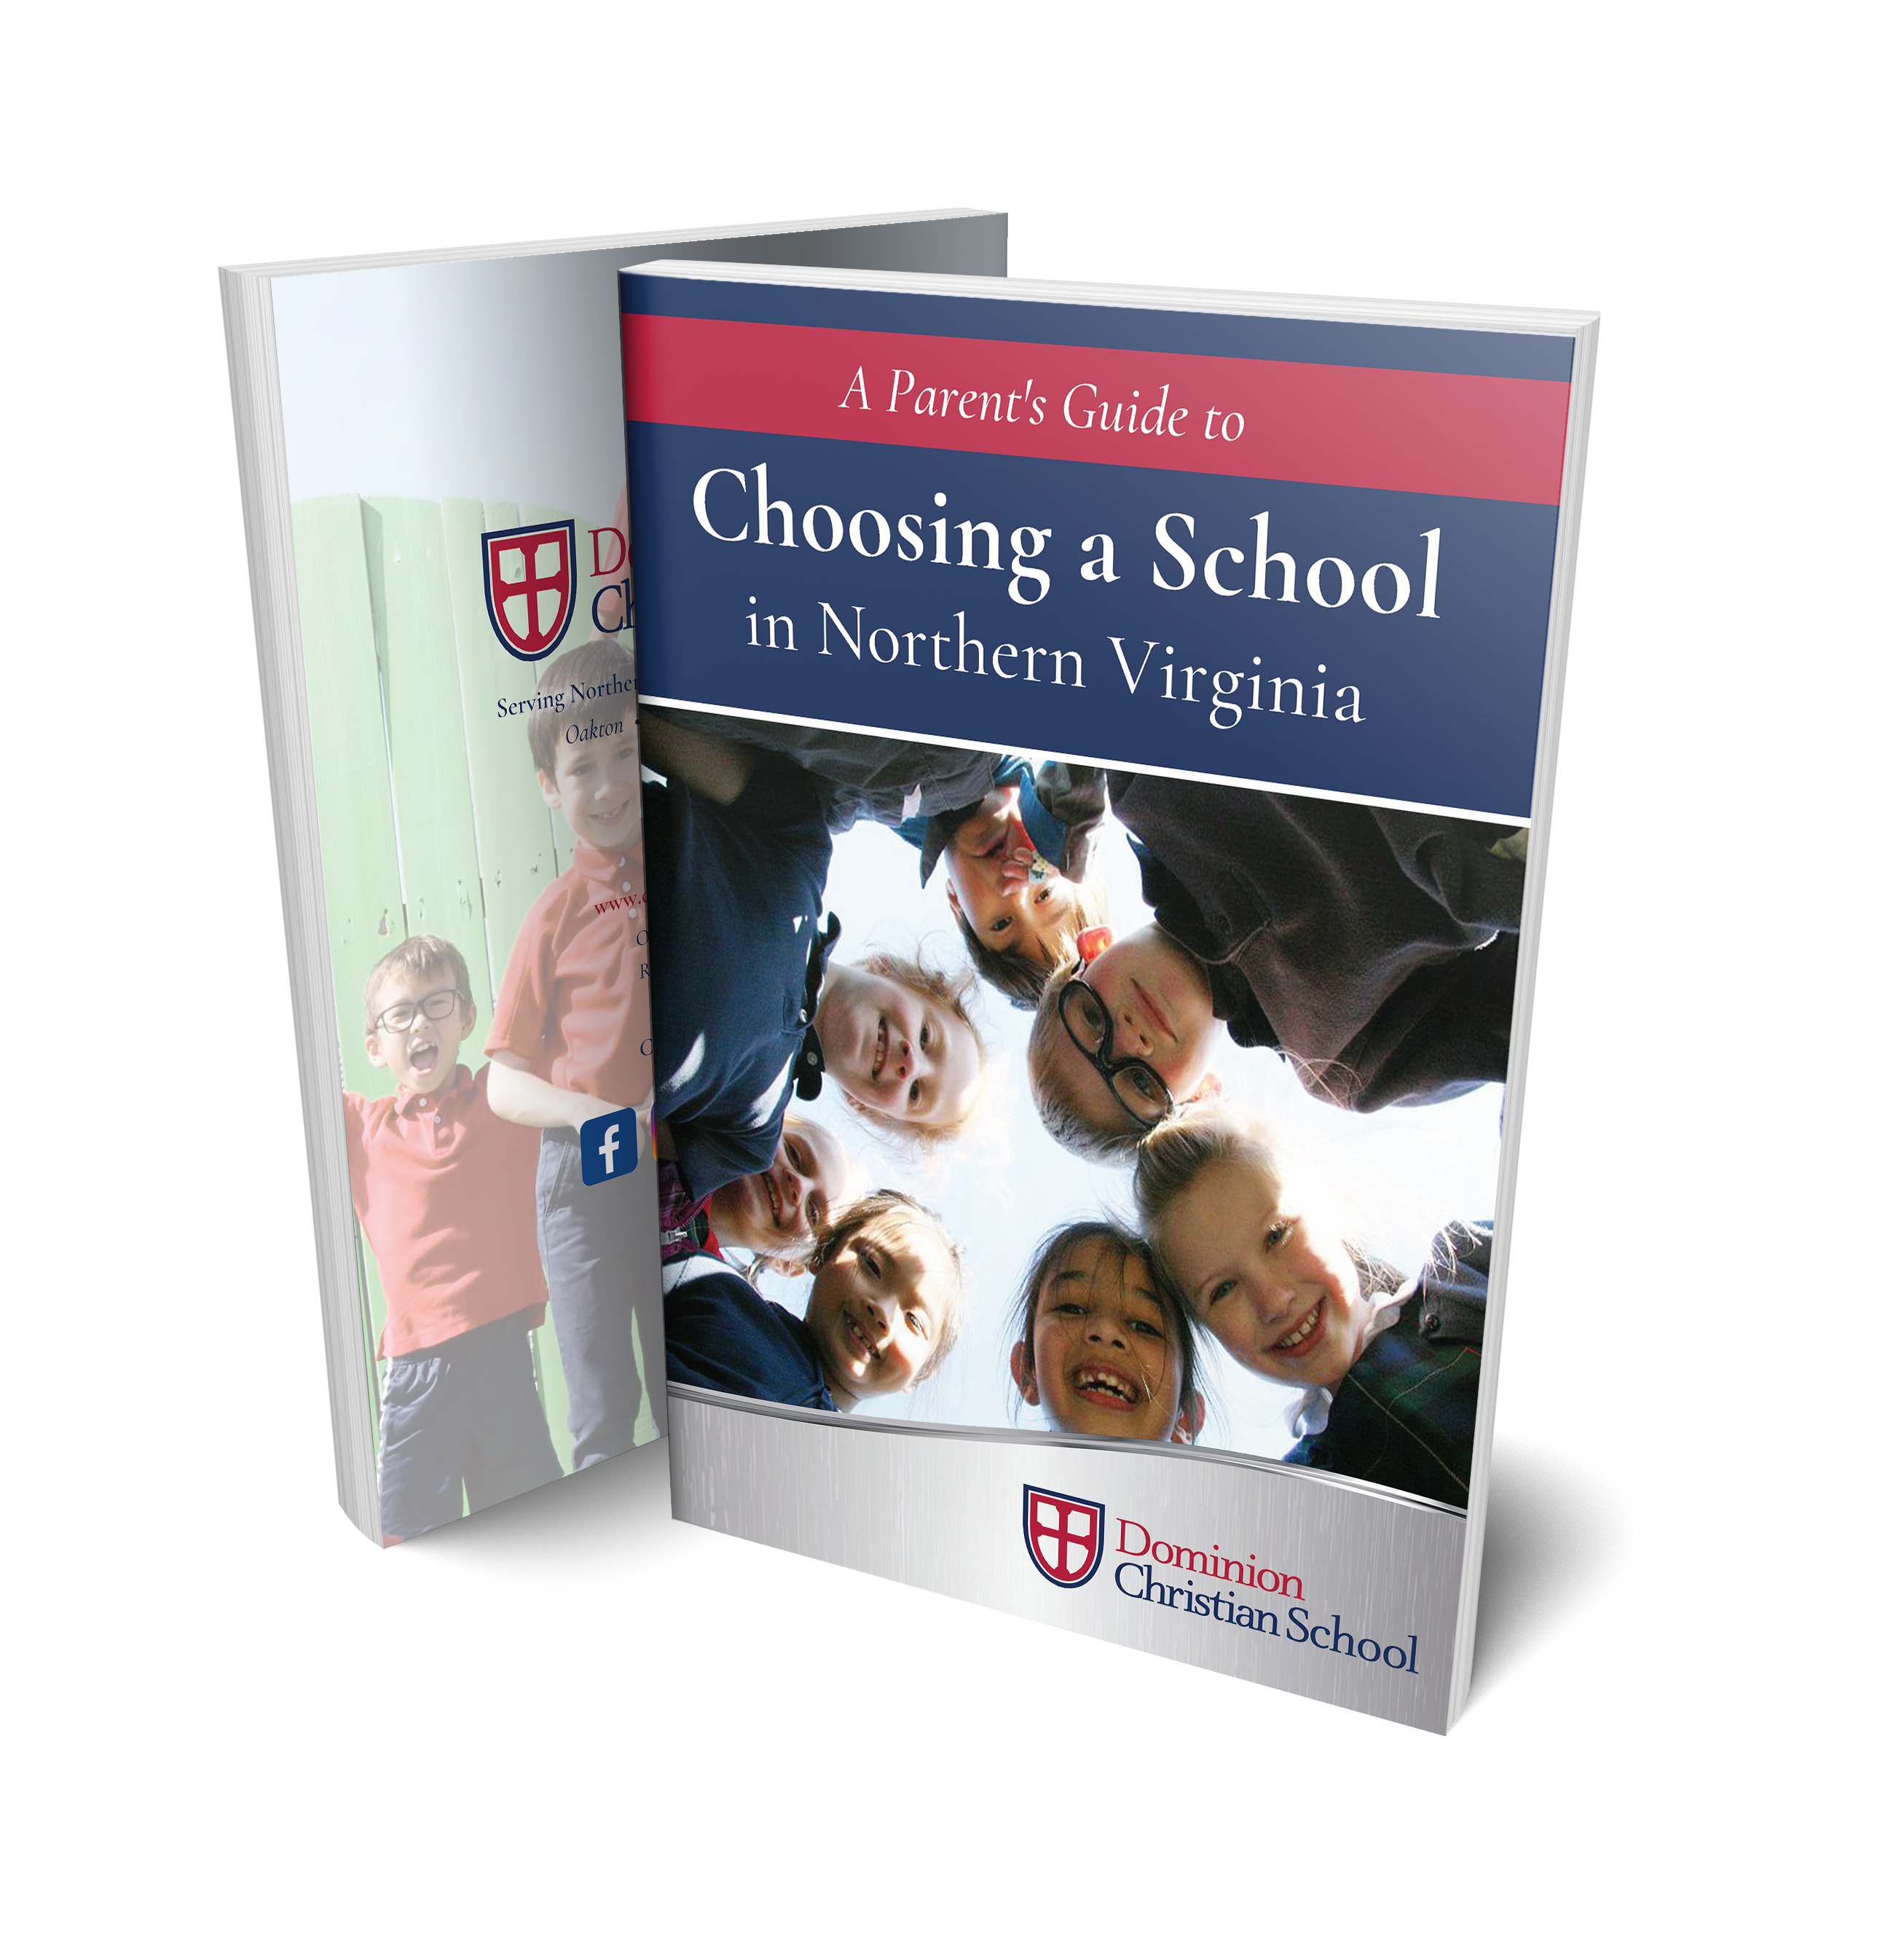 A Parent's Guide to Choosing a School in Northern Virginia